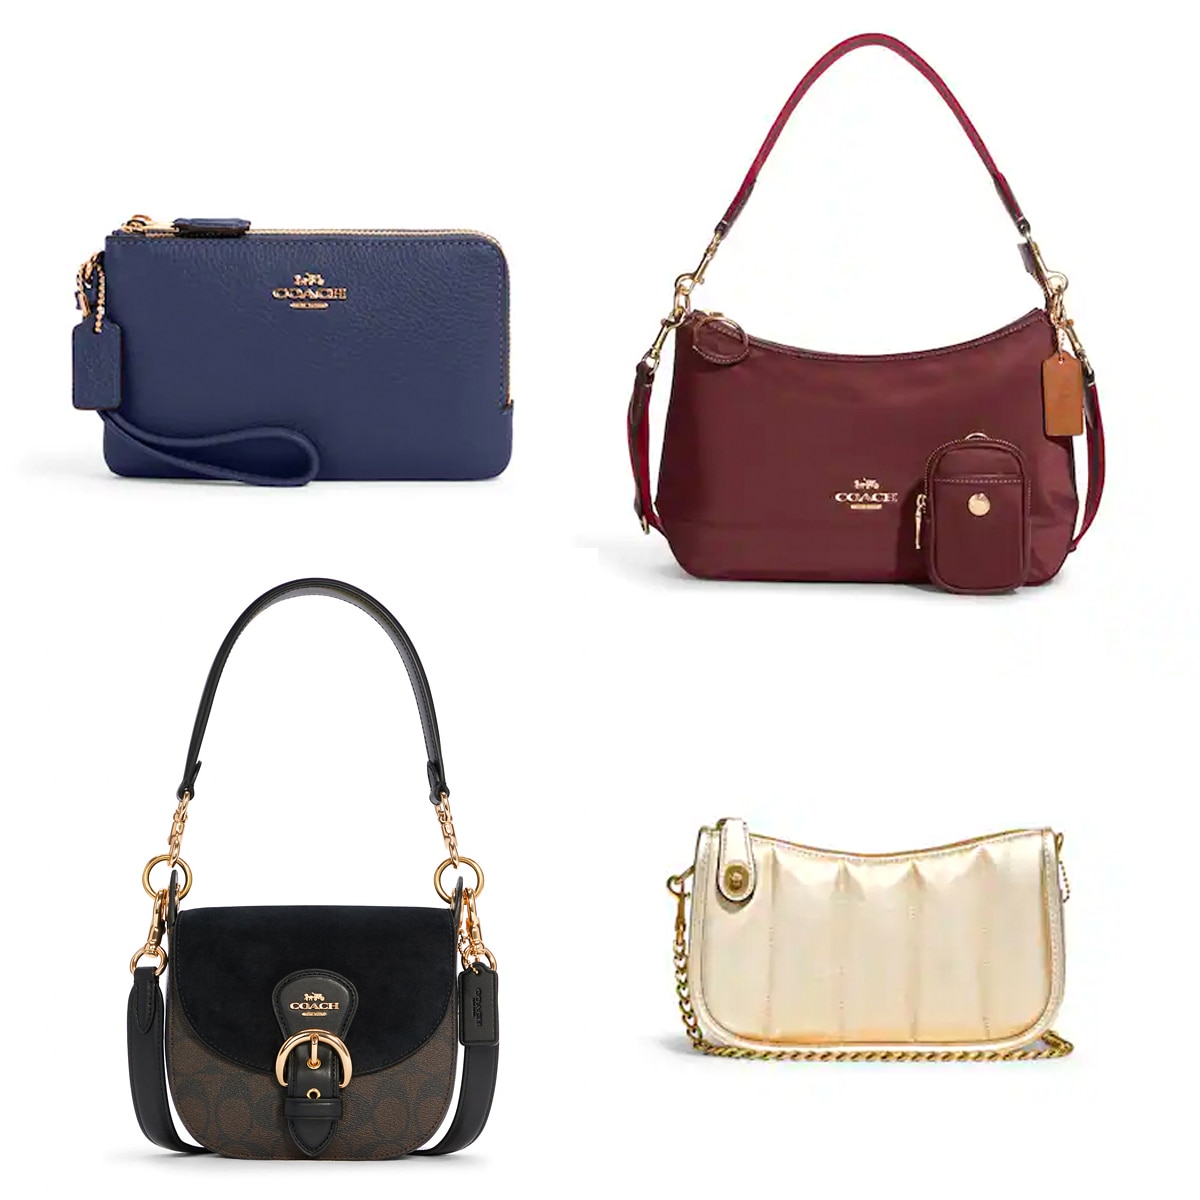 Find Your Perfect Ladies Leather Handbag Today at an unbeatable discounts